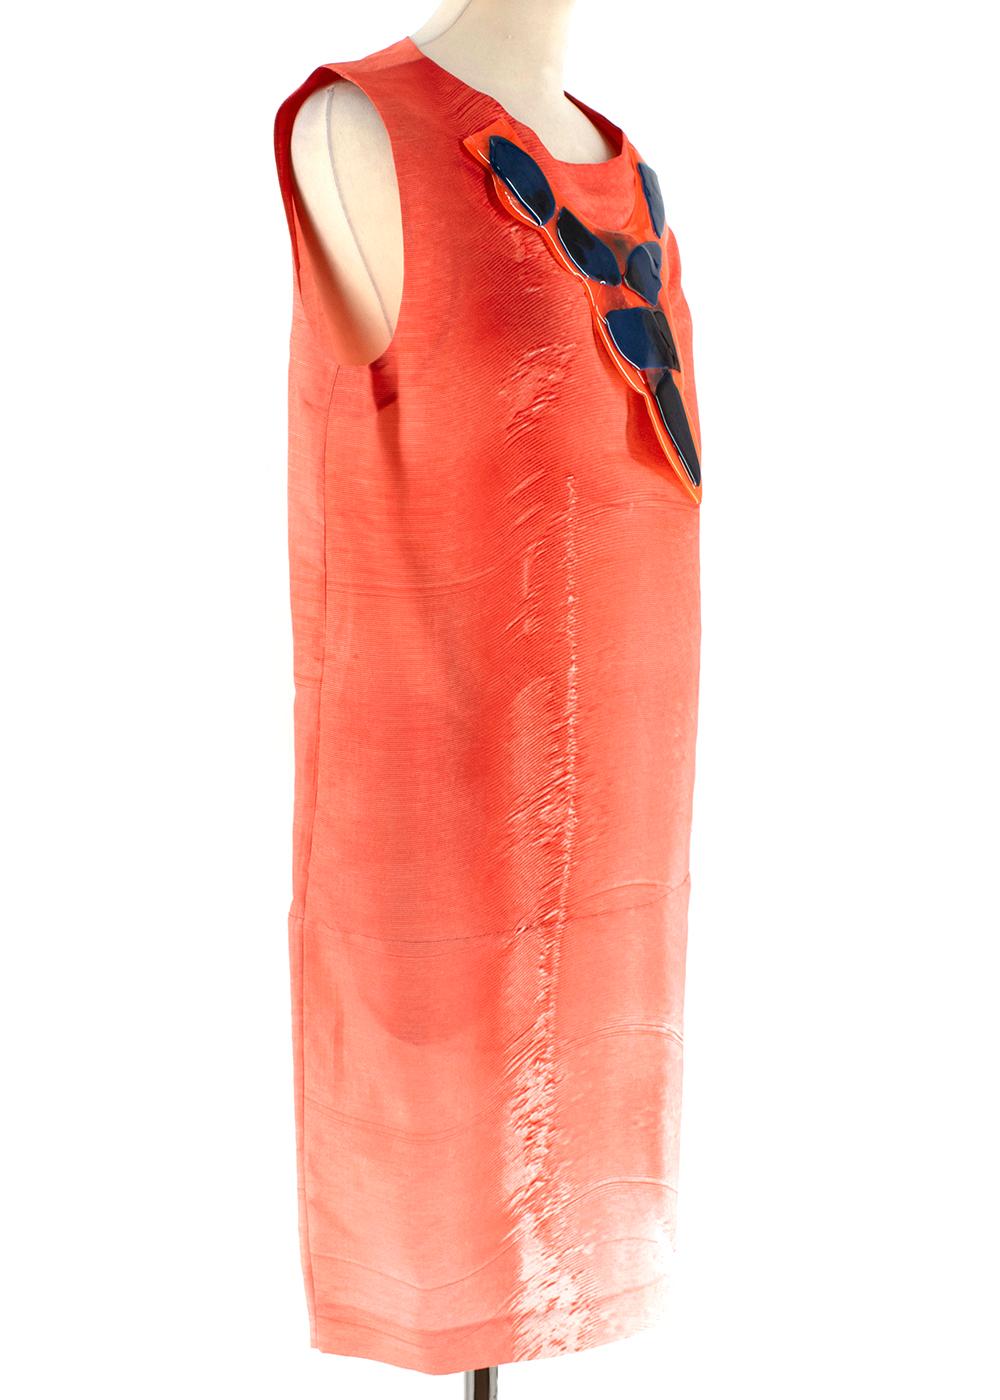 Marni Red Shift Dress With Front Textured Motif 

- Shift style 
- Plastic motif attached to the front, navy blue shapes on a red background
- Round neck 
- Sleeveless
- Back zip fastening 
- Side slip pockets 

THERE IS NO CARE LABEL THEREFORE WE